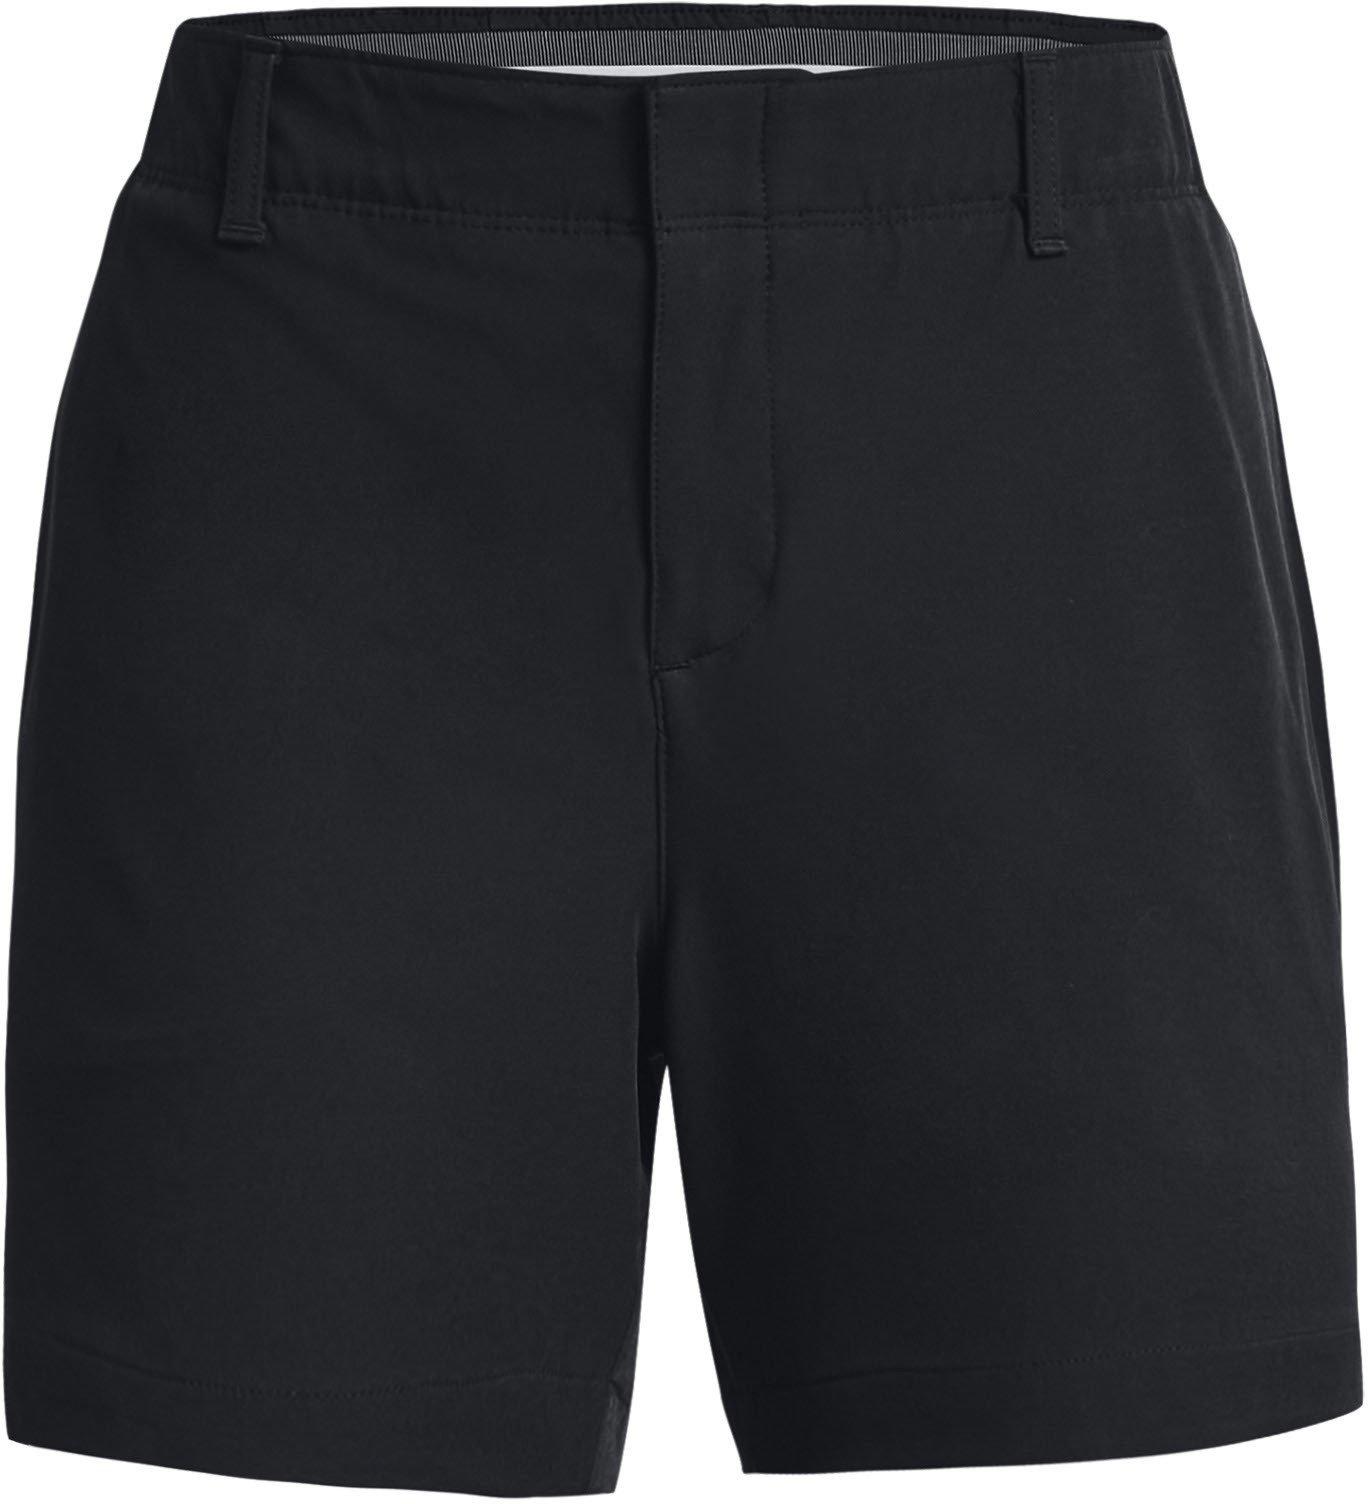 Under Armour Links Shorty-BLK 0